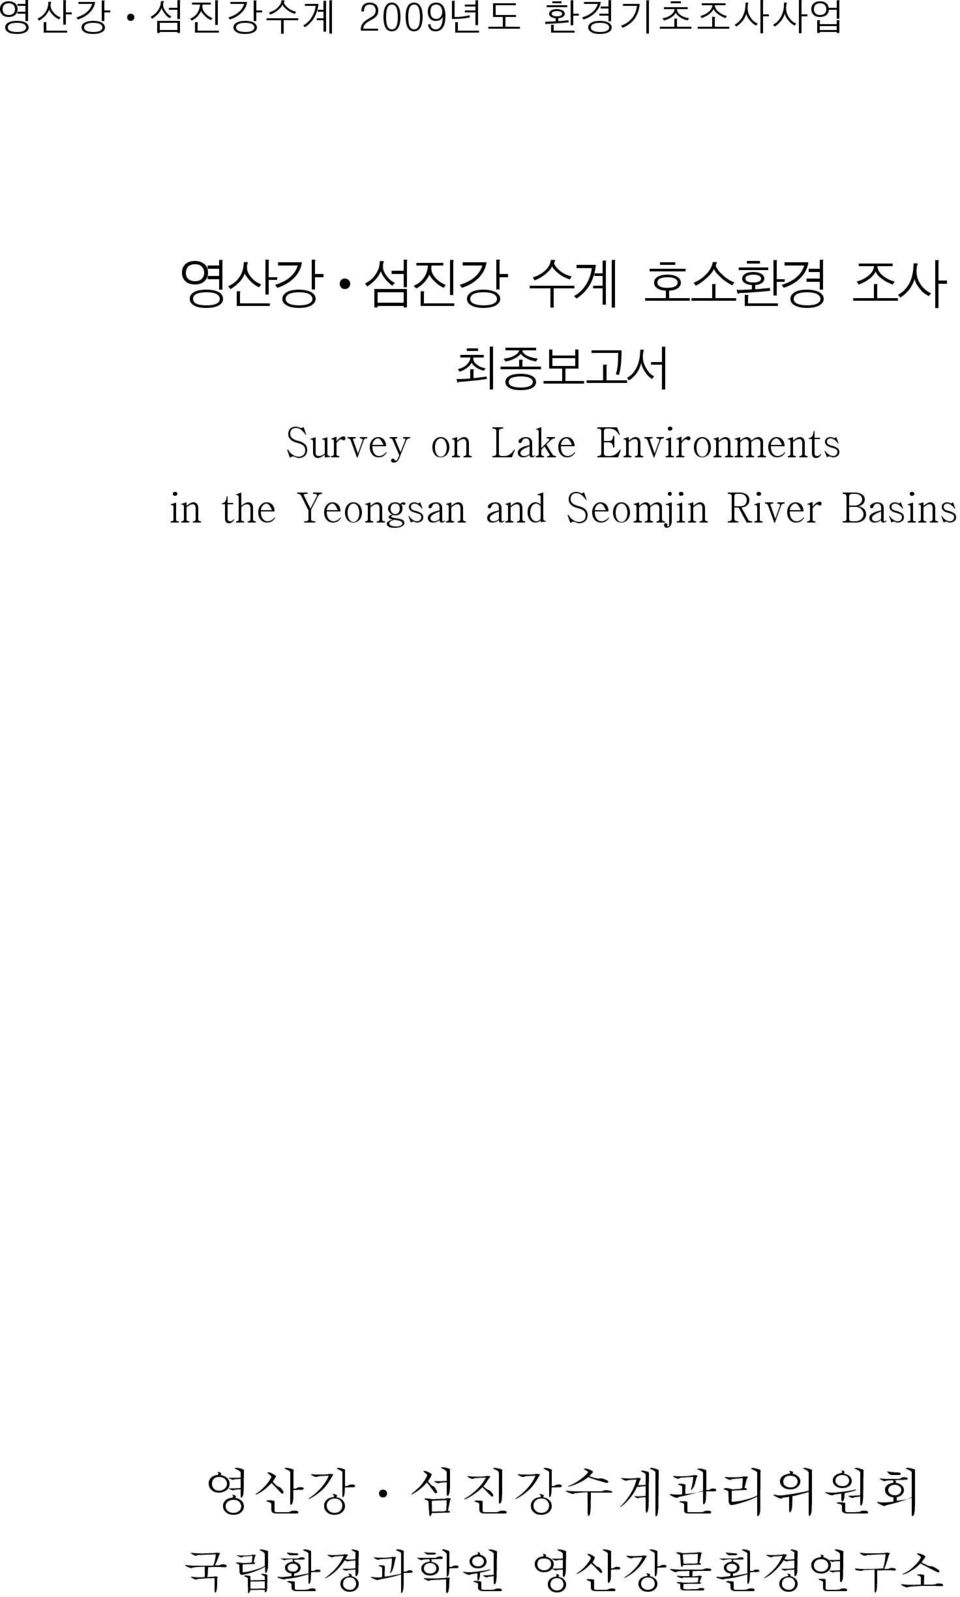 Environments in the Yeongsan and